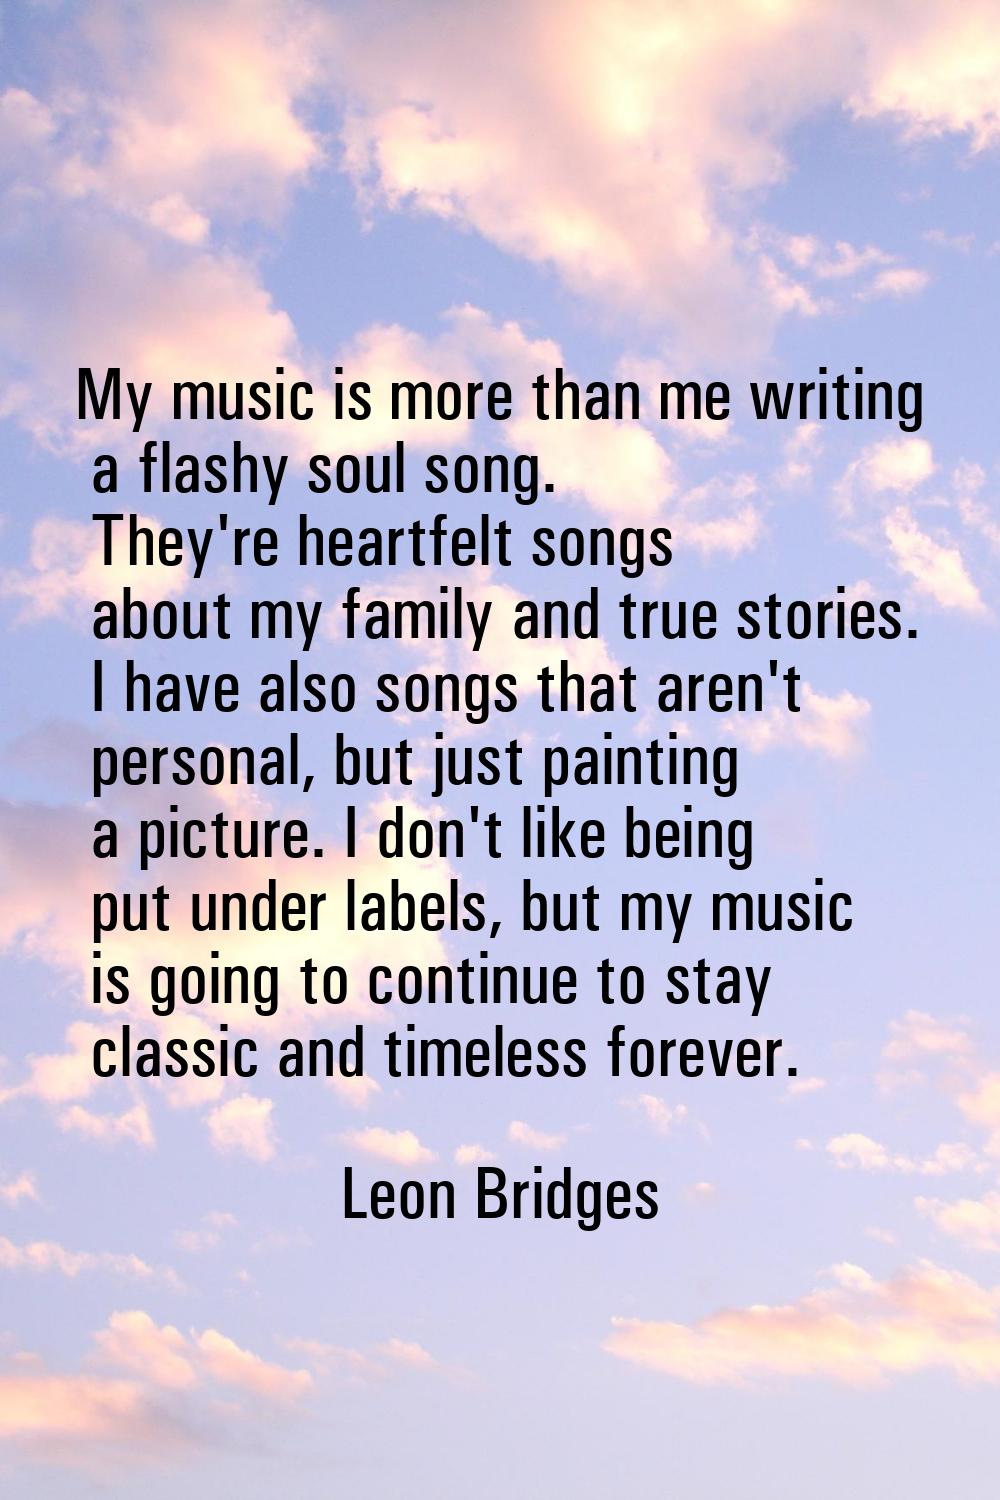 My music is more than me writing a flashy soul song. They're heartfelt songs about my family and tr